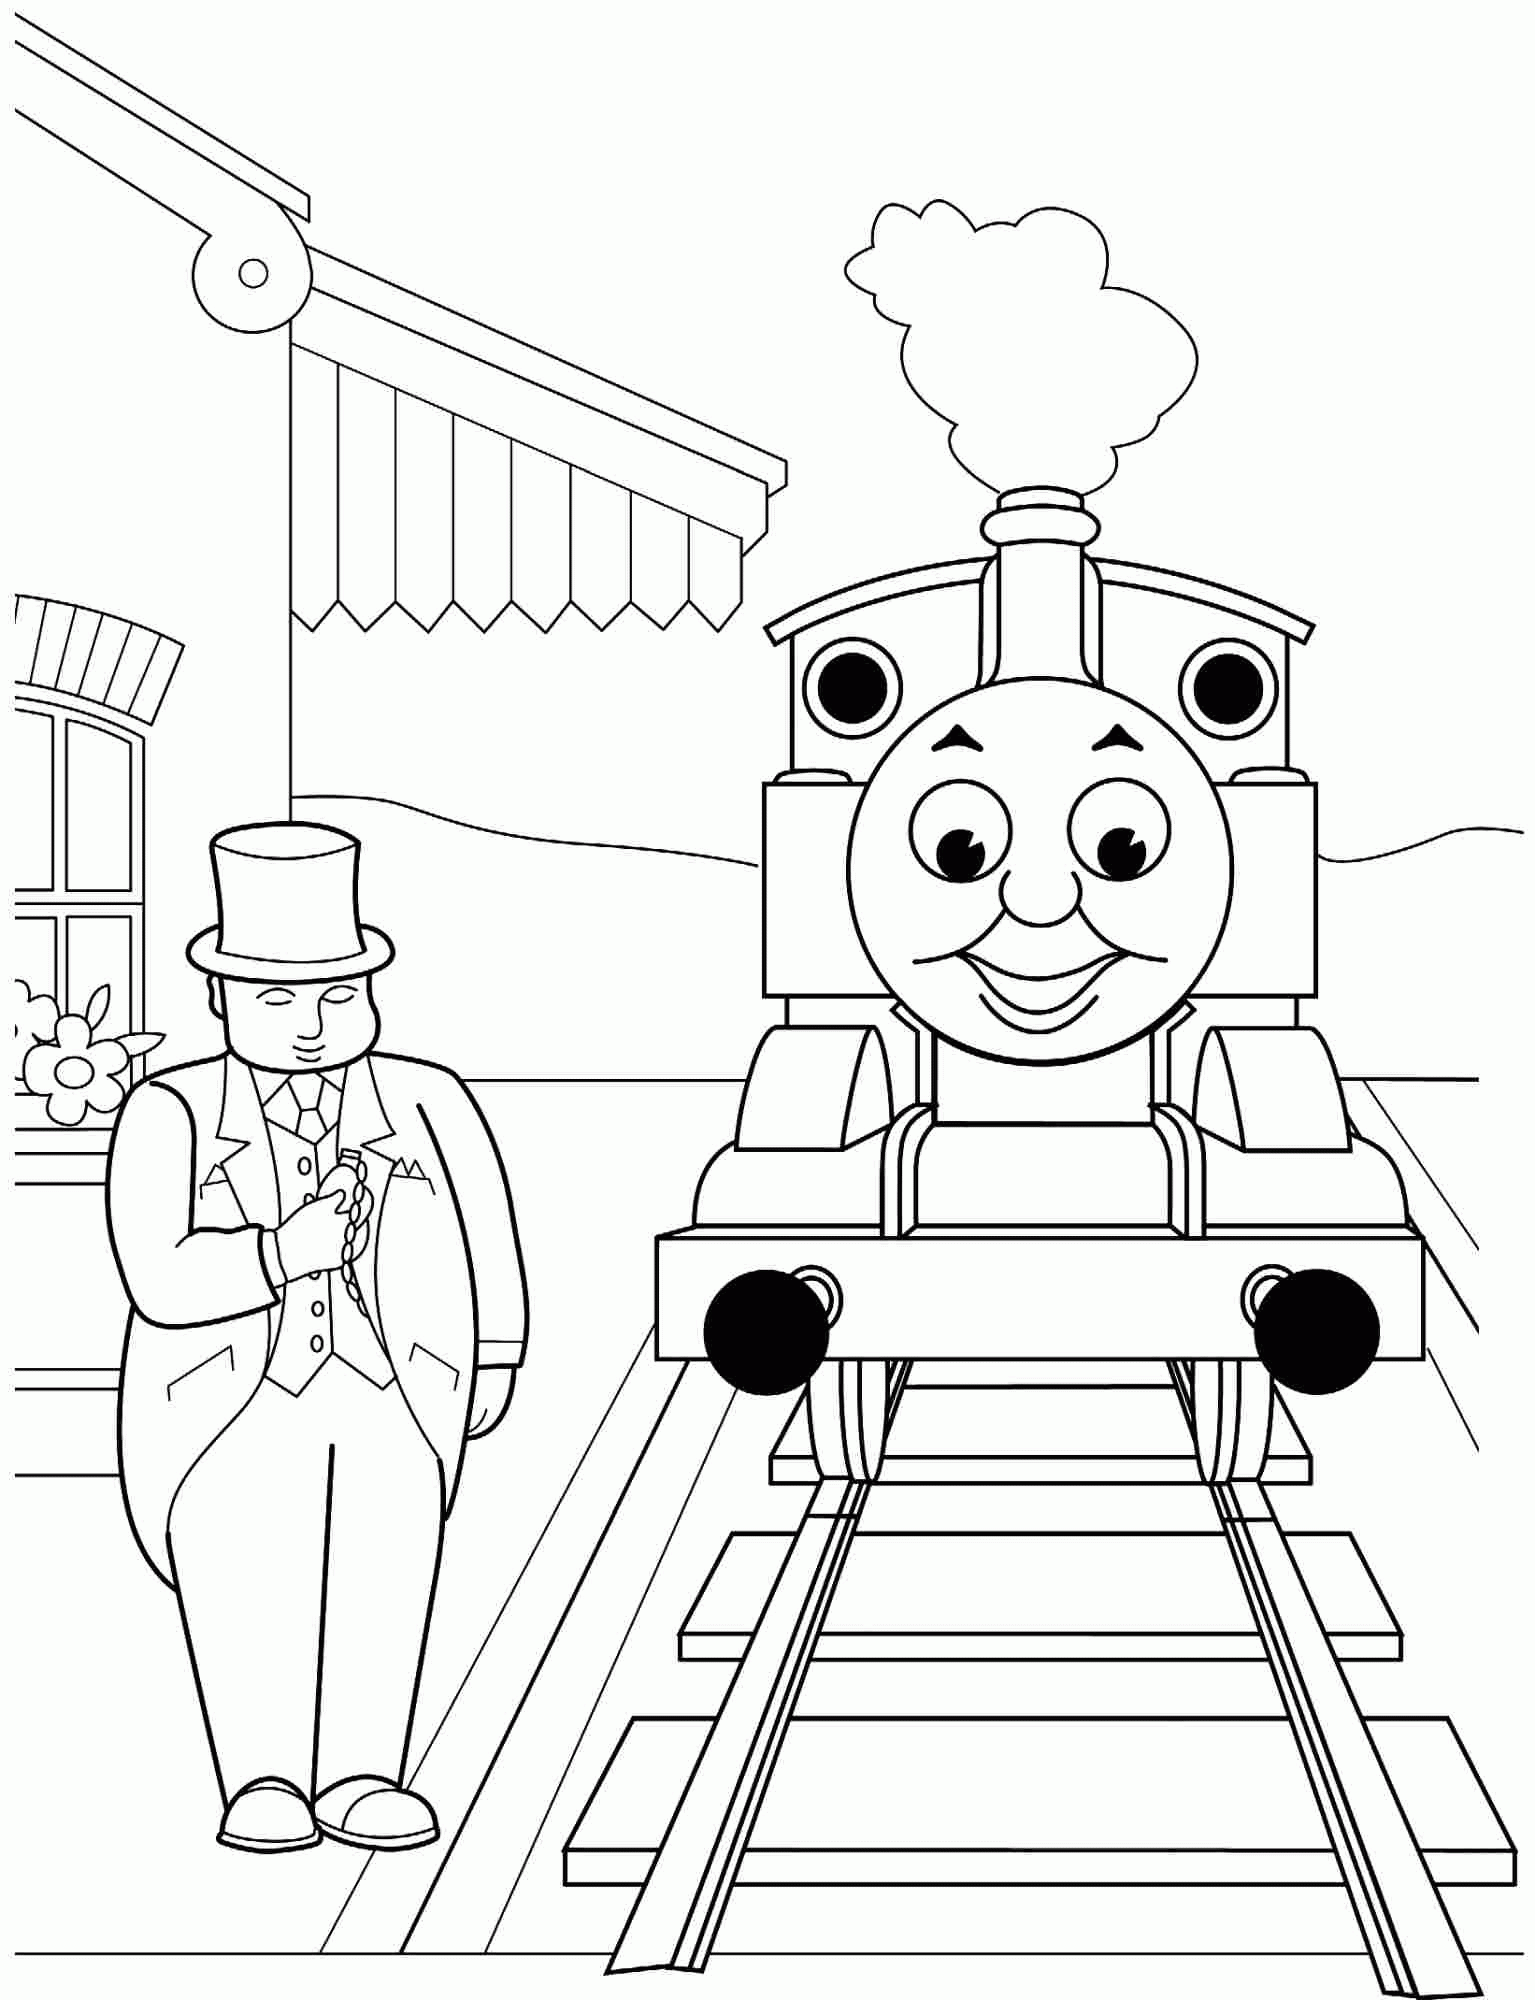 Blank Train Coloring Pages - Coloring Home